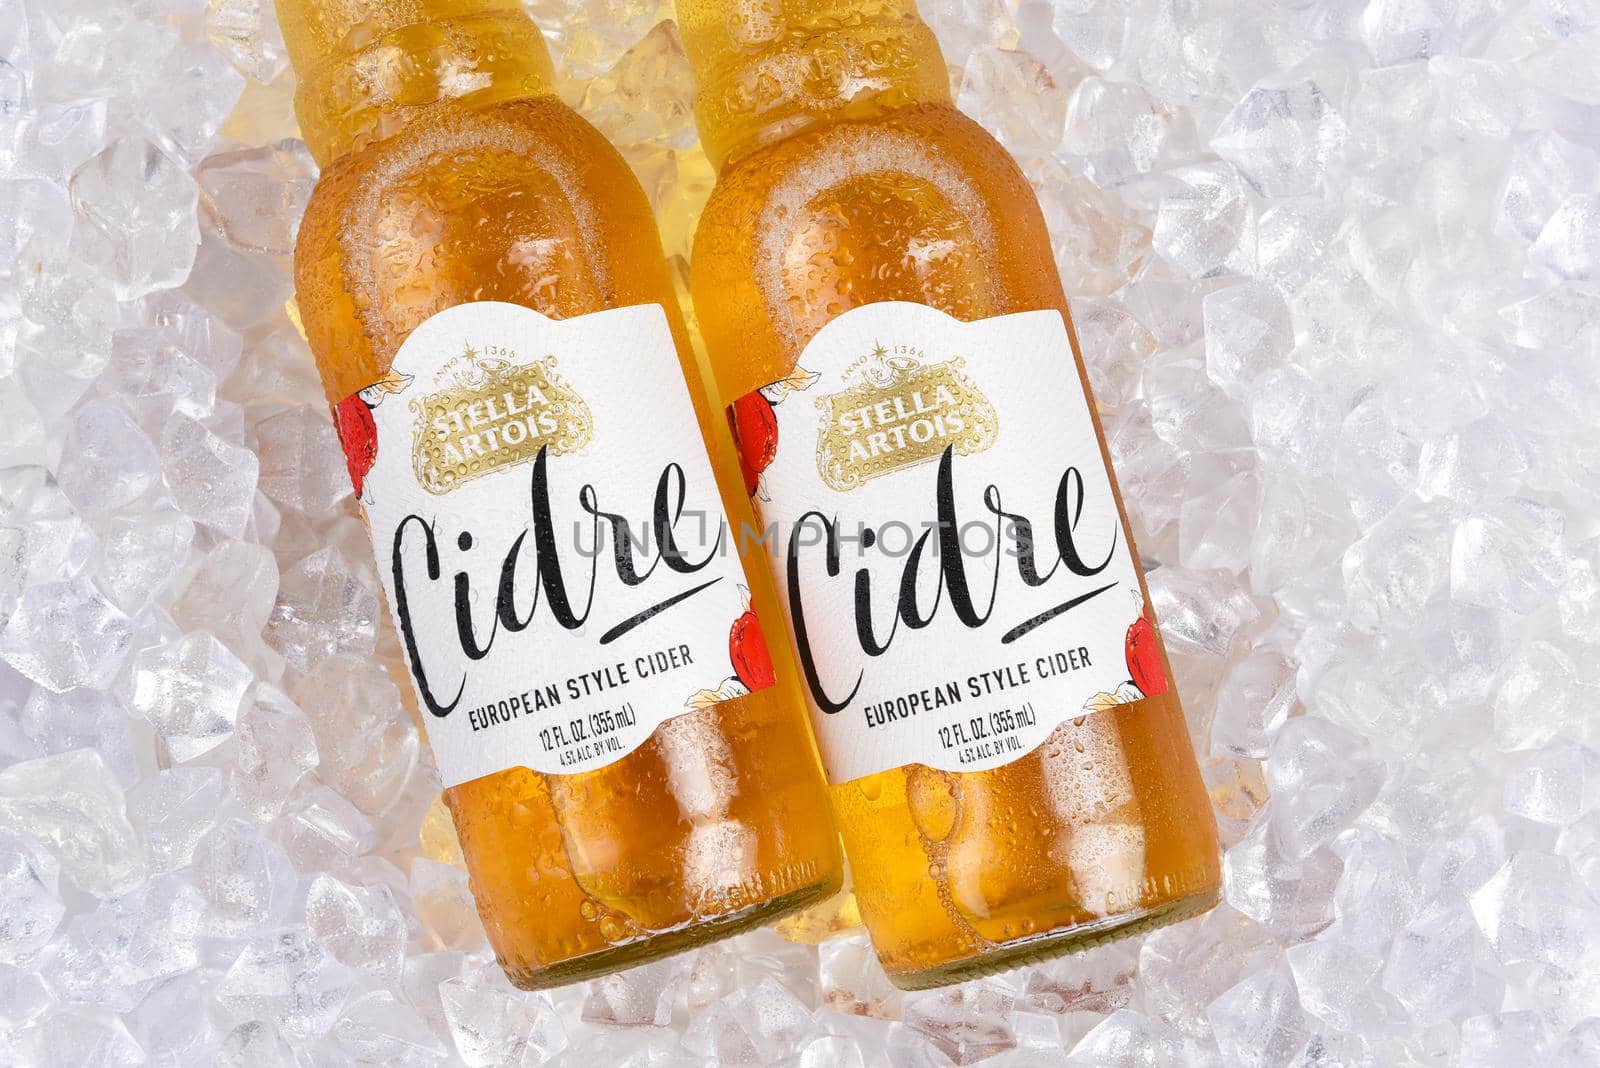 IRVINE, CALIFORNIA - 2 JUNE 2020: Closeup of two bottle of Stella Artois Cider, European Style Hard Apple cider, on a bed of ice.